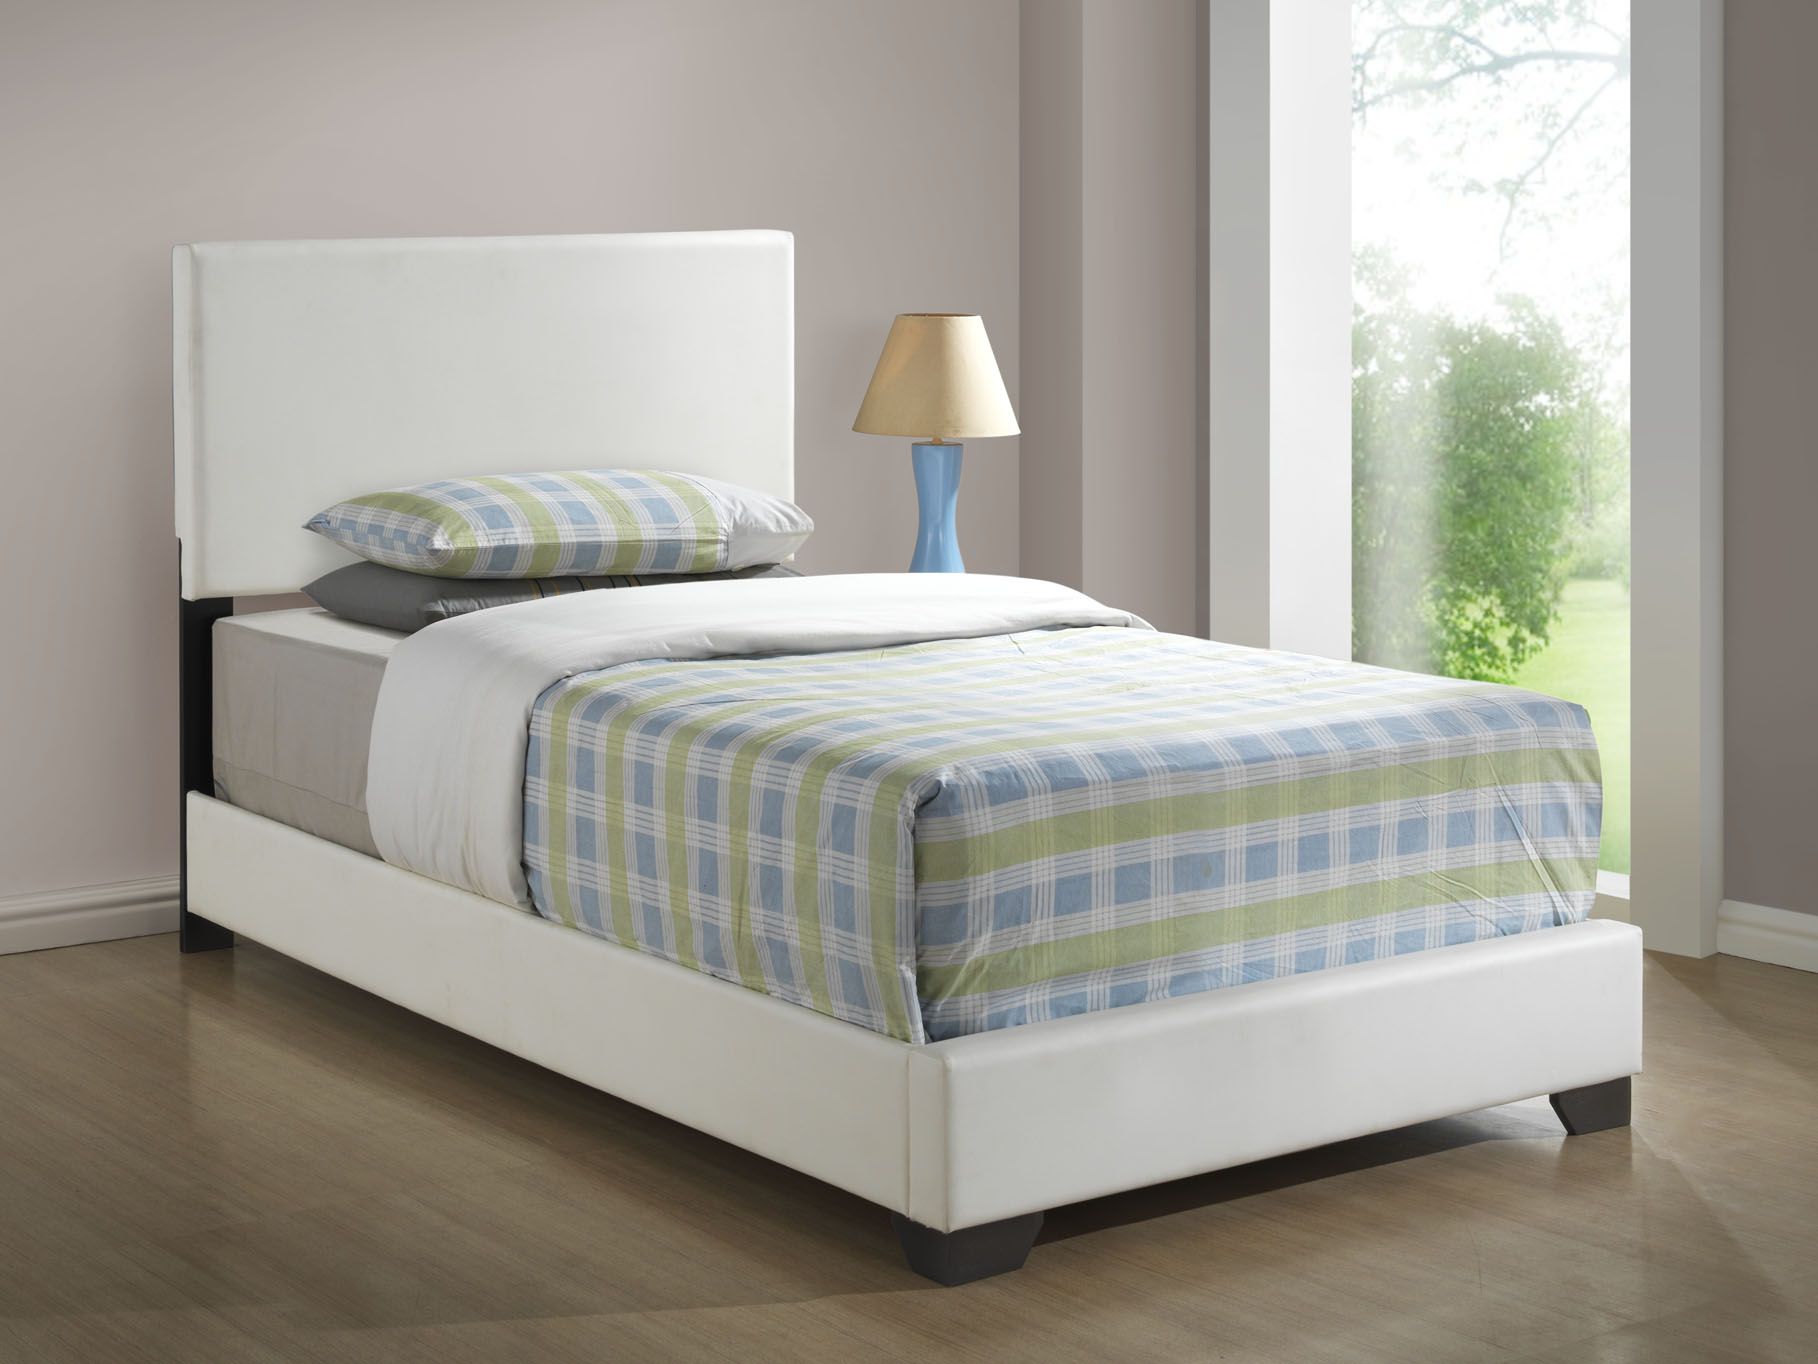 BED - TWIN SIZE / WHITE LEATHER-LOOK FABRIC